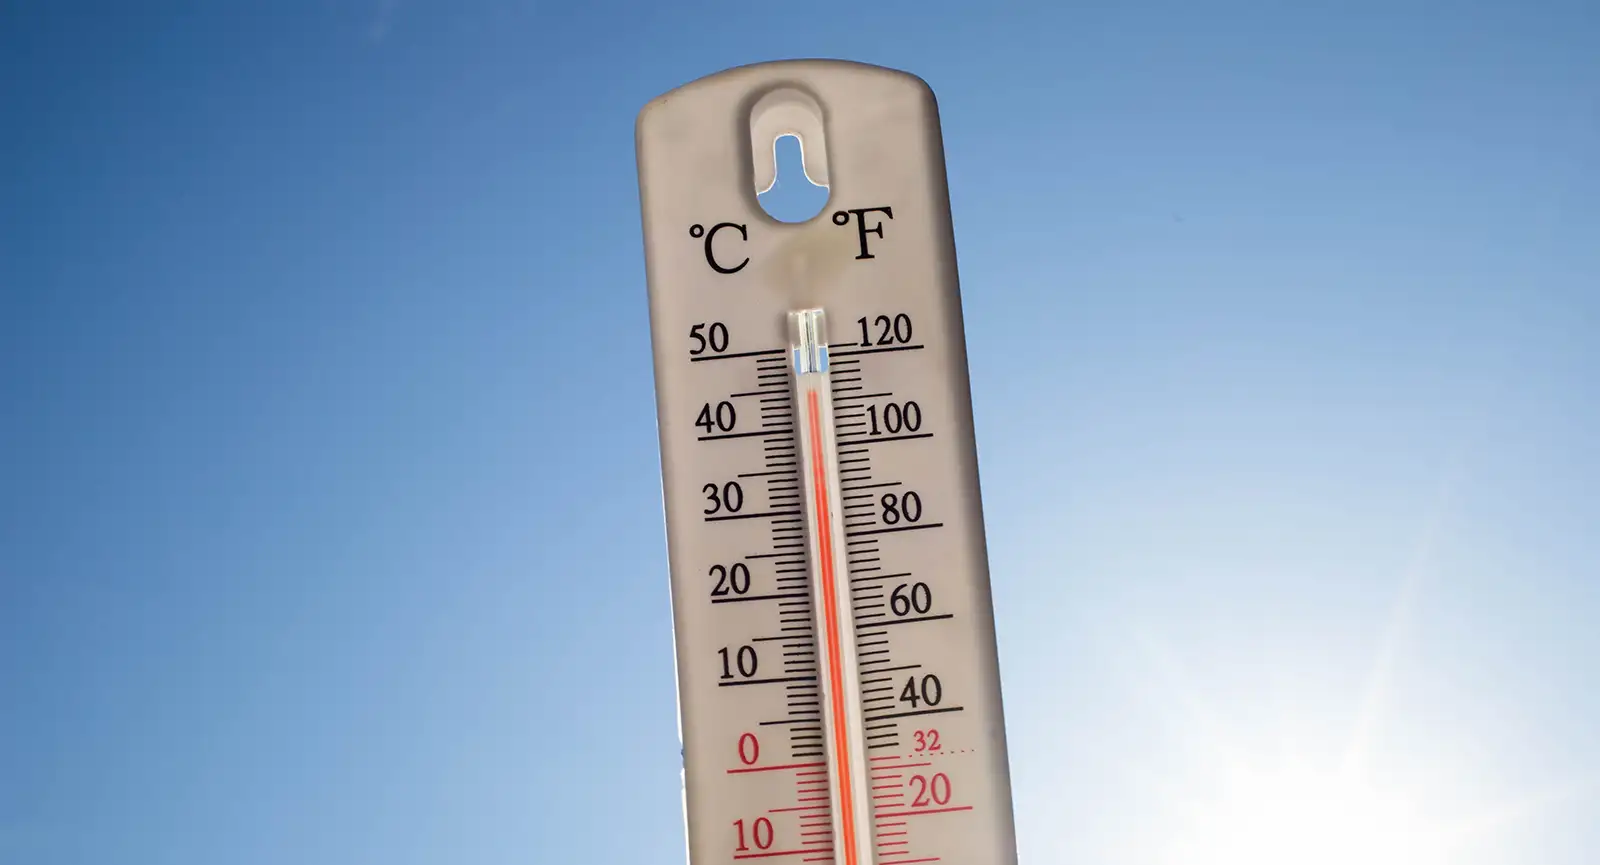 thermometer over 38 degrees heat wave